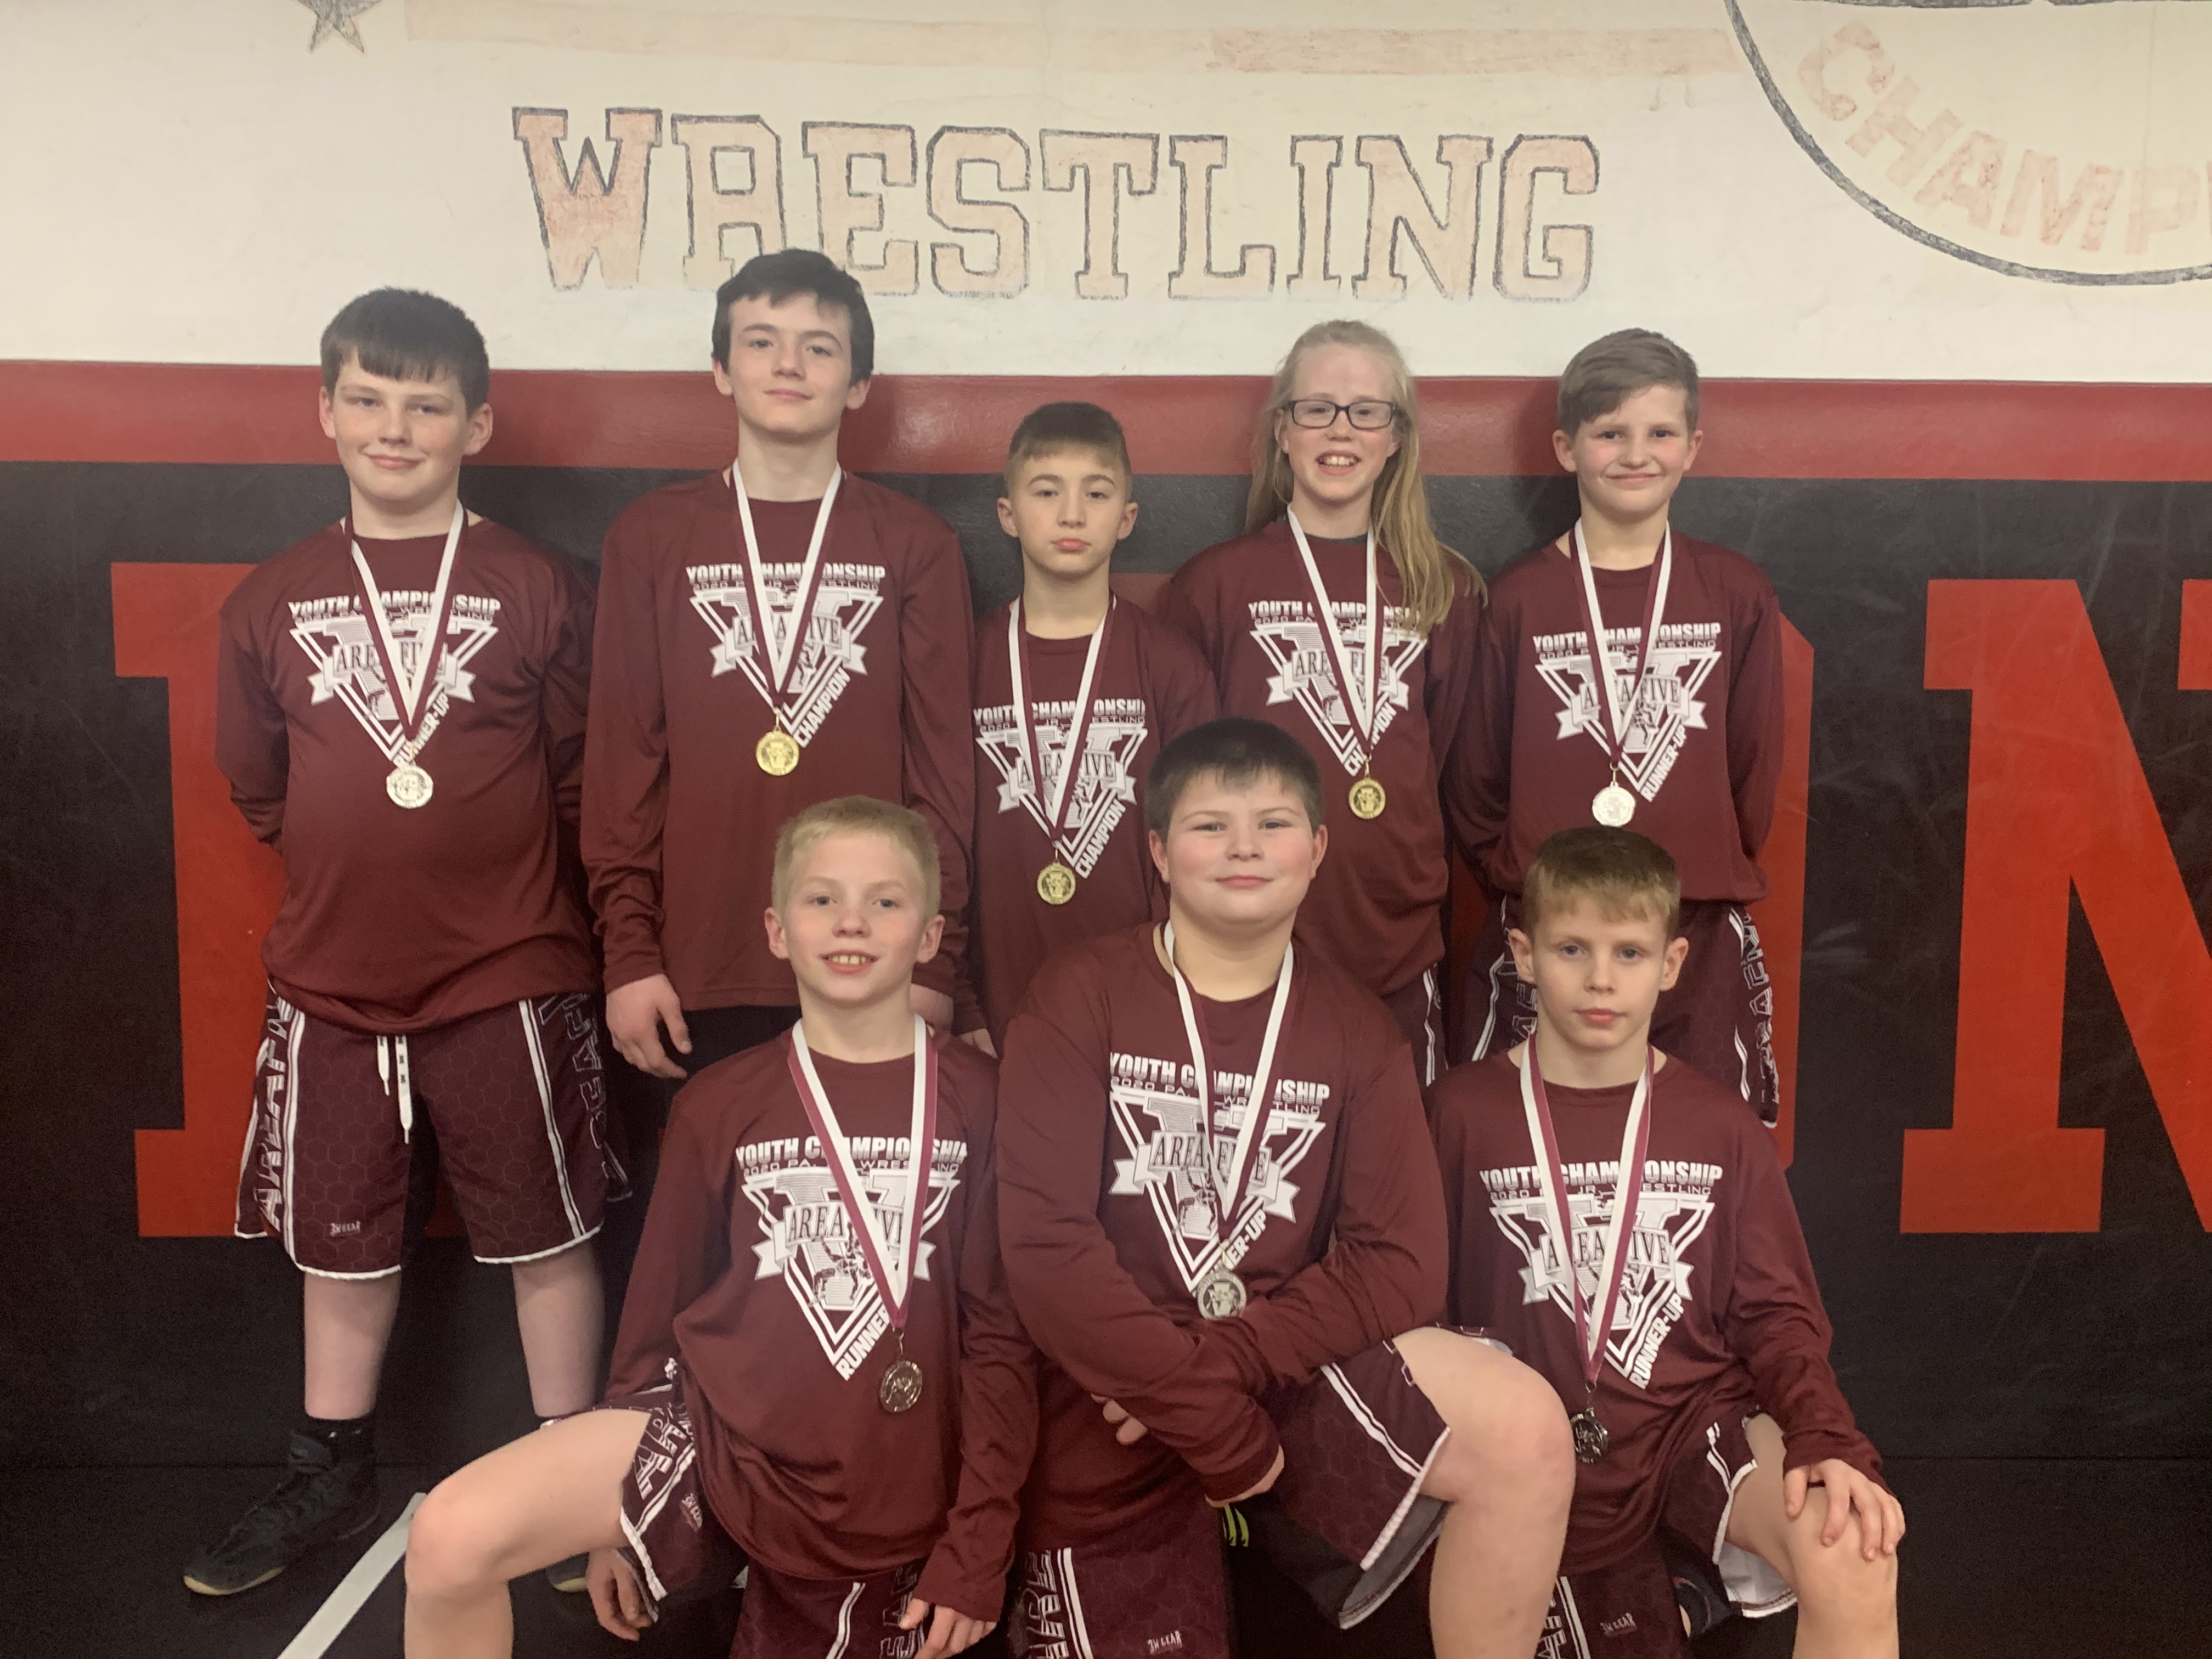 Picture L-R front row- Bo Aveni, Brayden Wills, Mathew Rowles. Back- Hunter Ressler, Brady Collins, Colton Ryan, Sonny Diehl, and Colton Bumbarger.